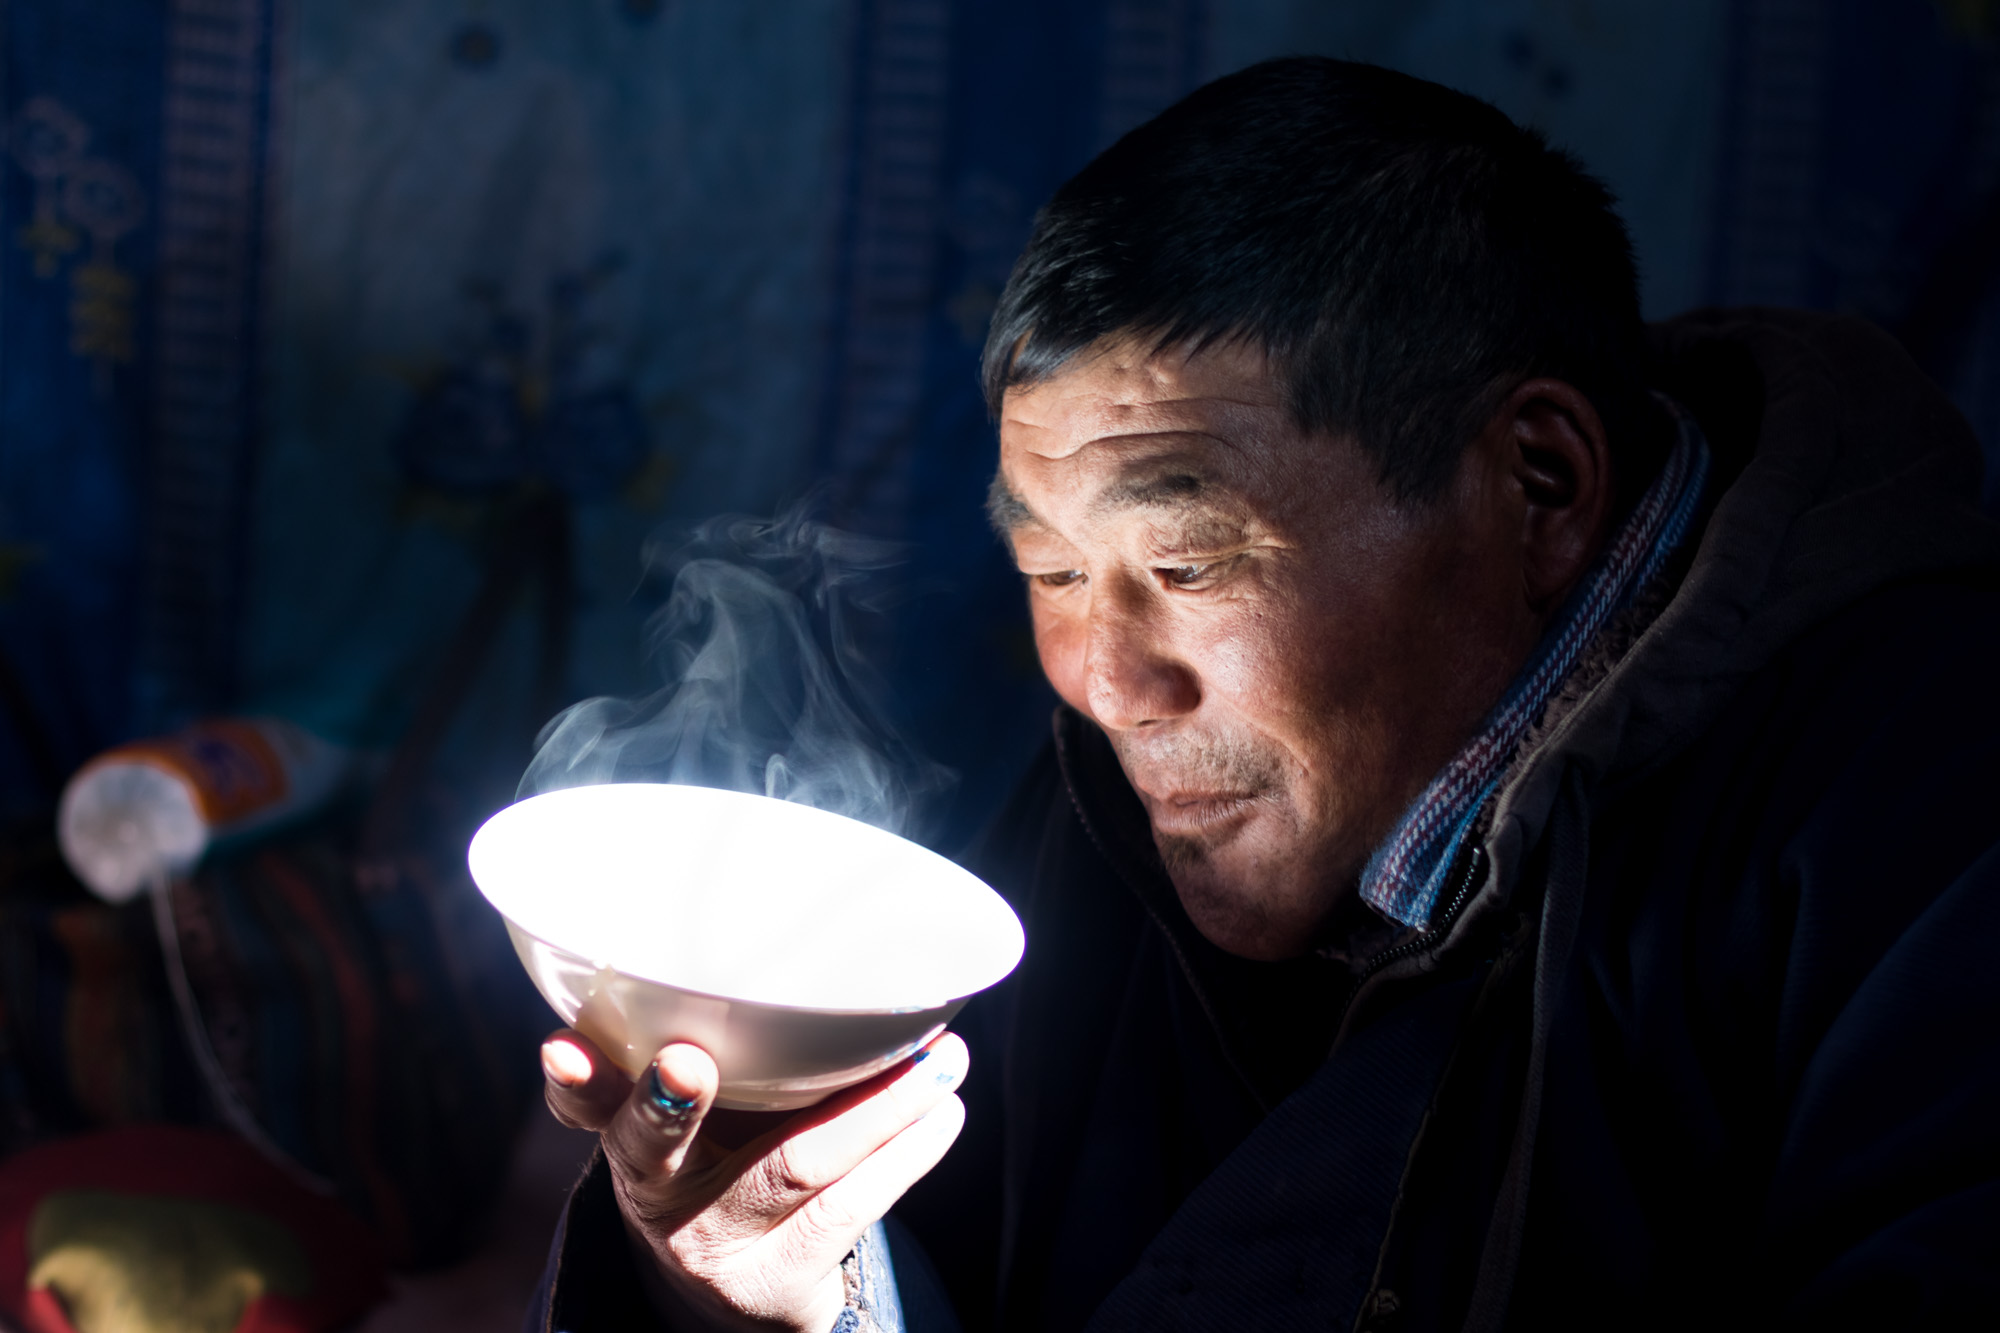 Jargal, an assistant herder, waits for his milk tea to cool down before sipping. Mongolian milk tea was popularized by Mongolian armies across the world during the height of the Mongolian Empire but has decreased in popularity for centuries, now mostly returning to being a local beverage.